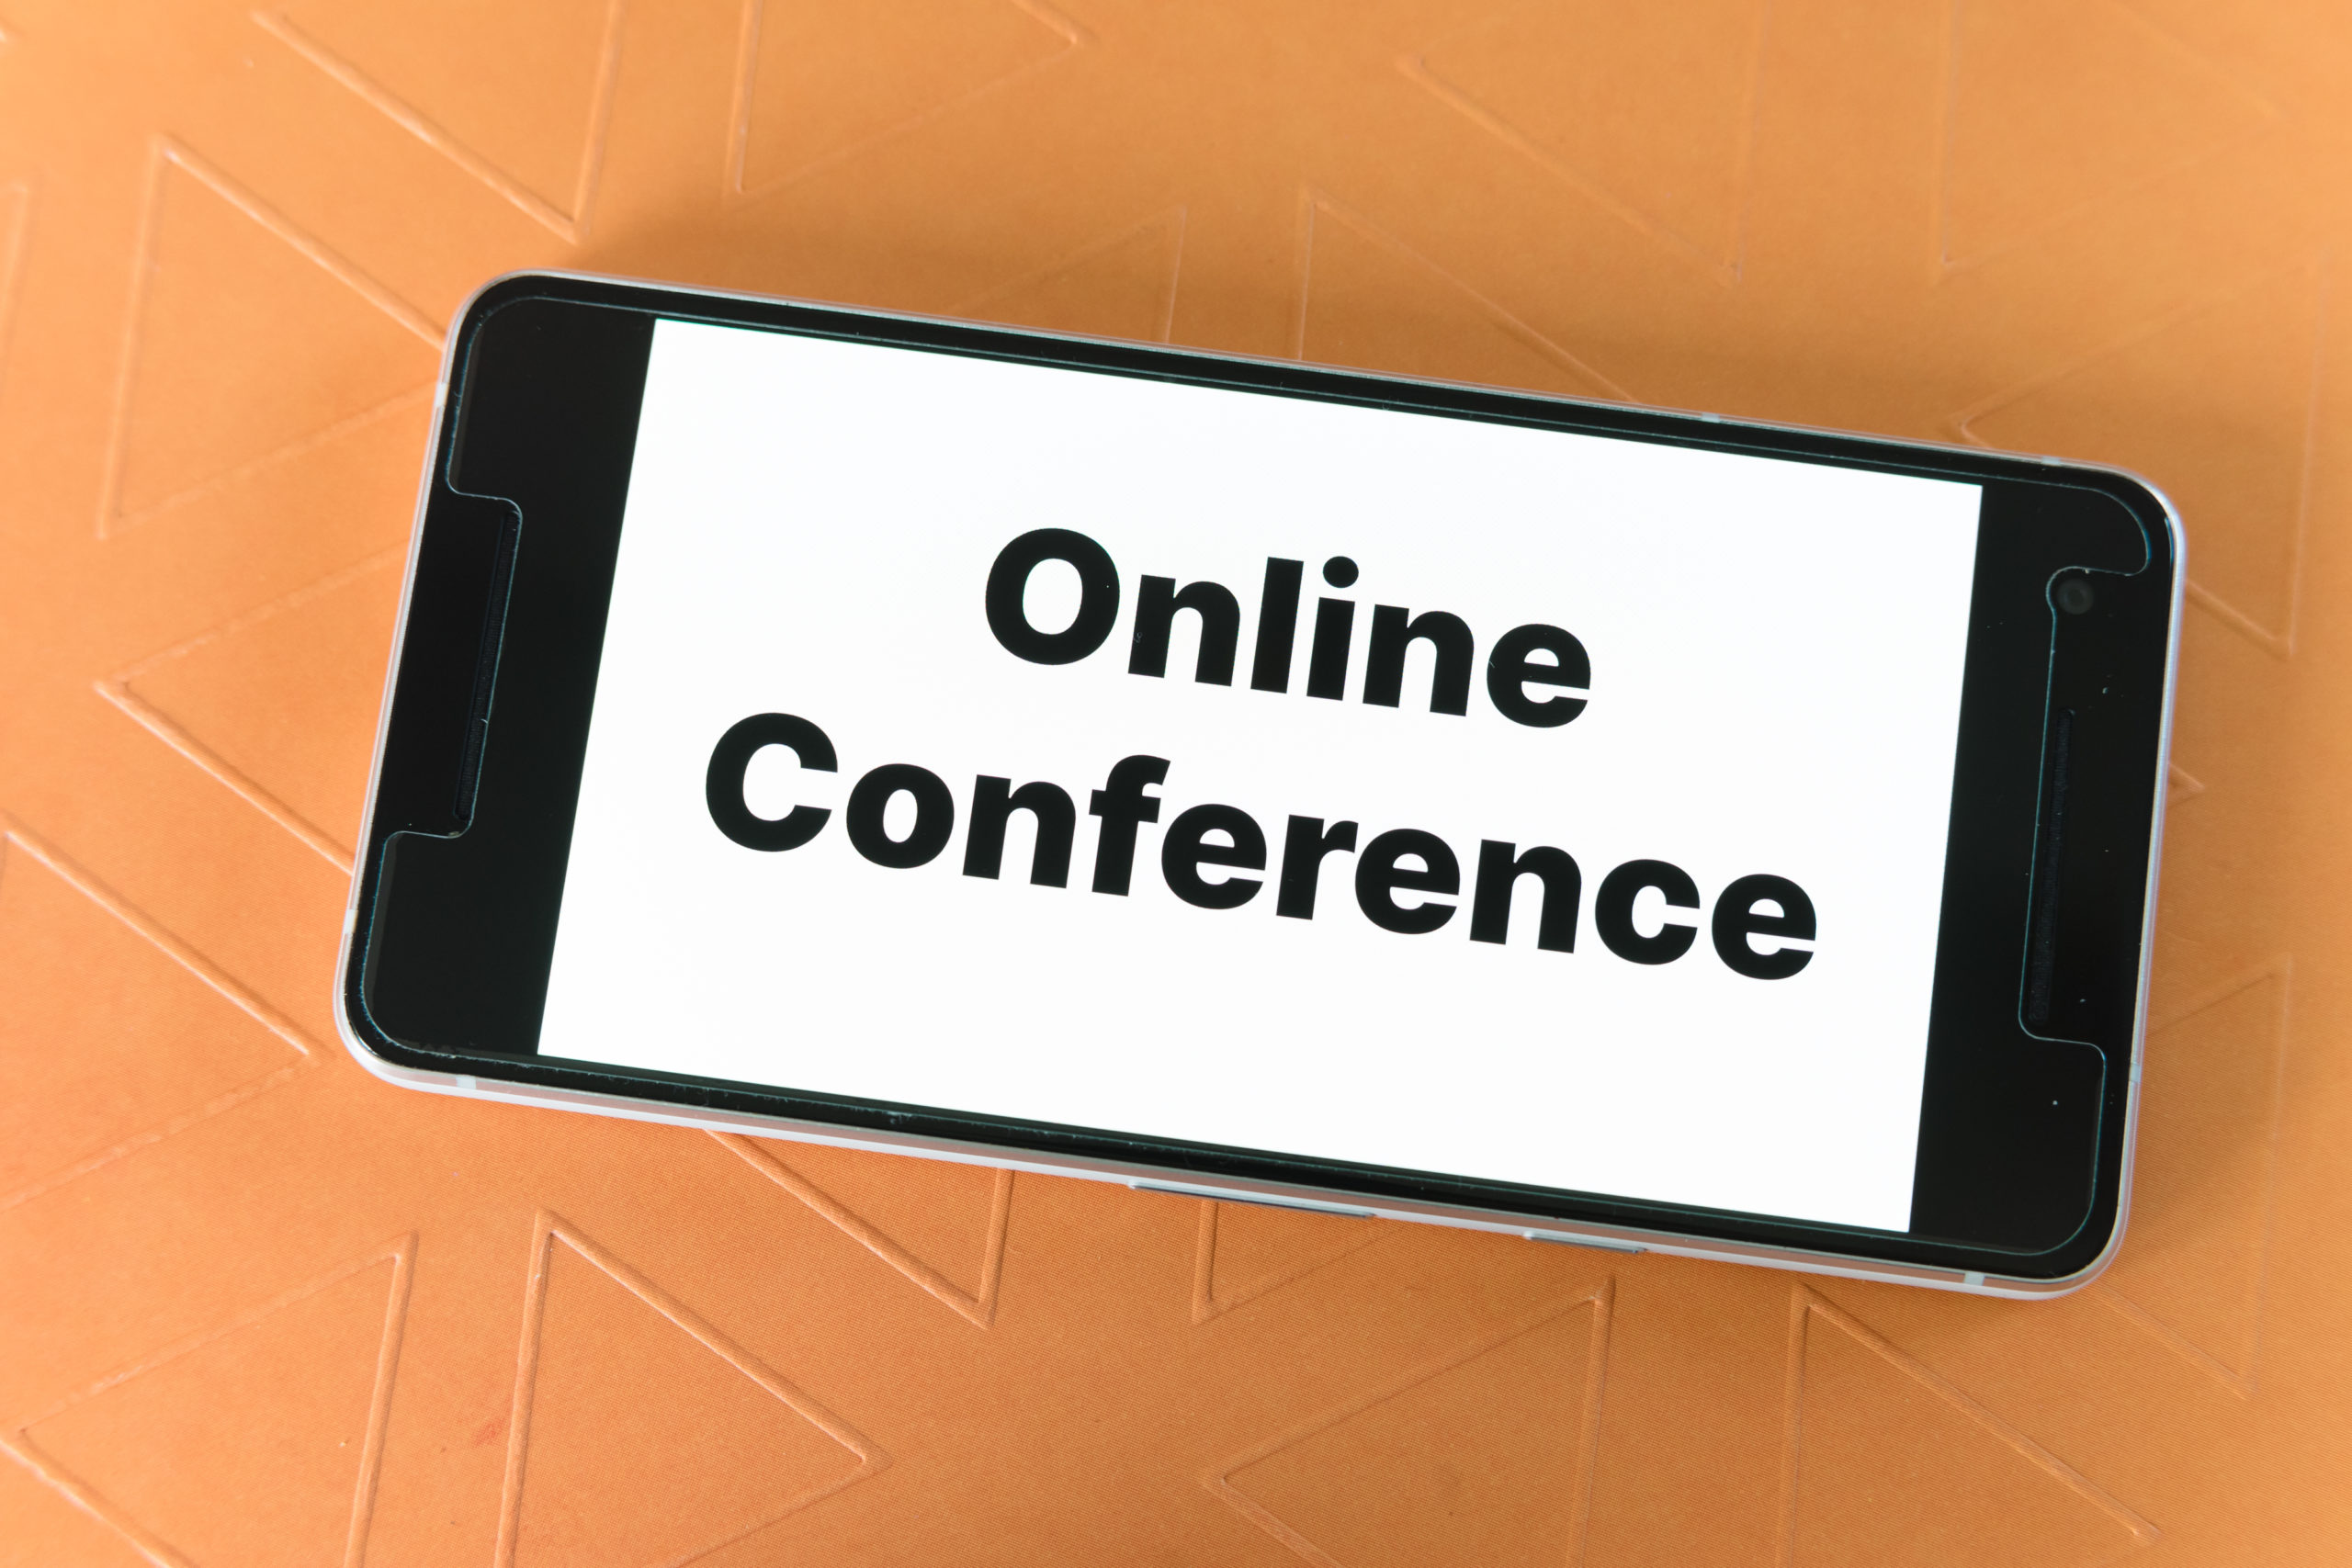 online-video-conference-meeting-tools-connection-1611985-pxhere.com